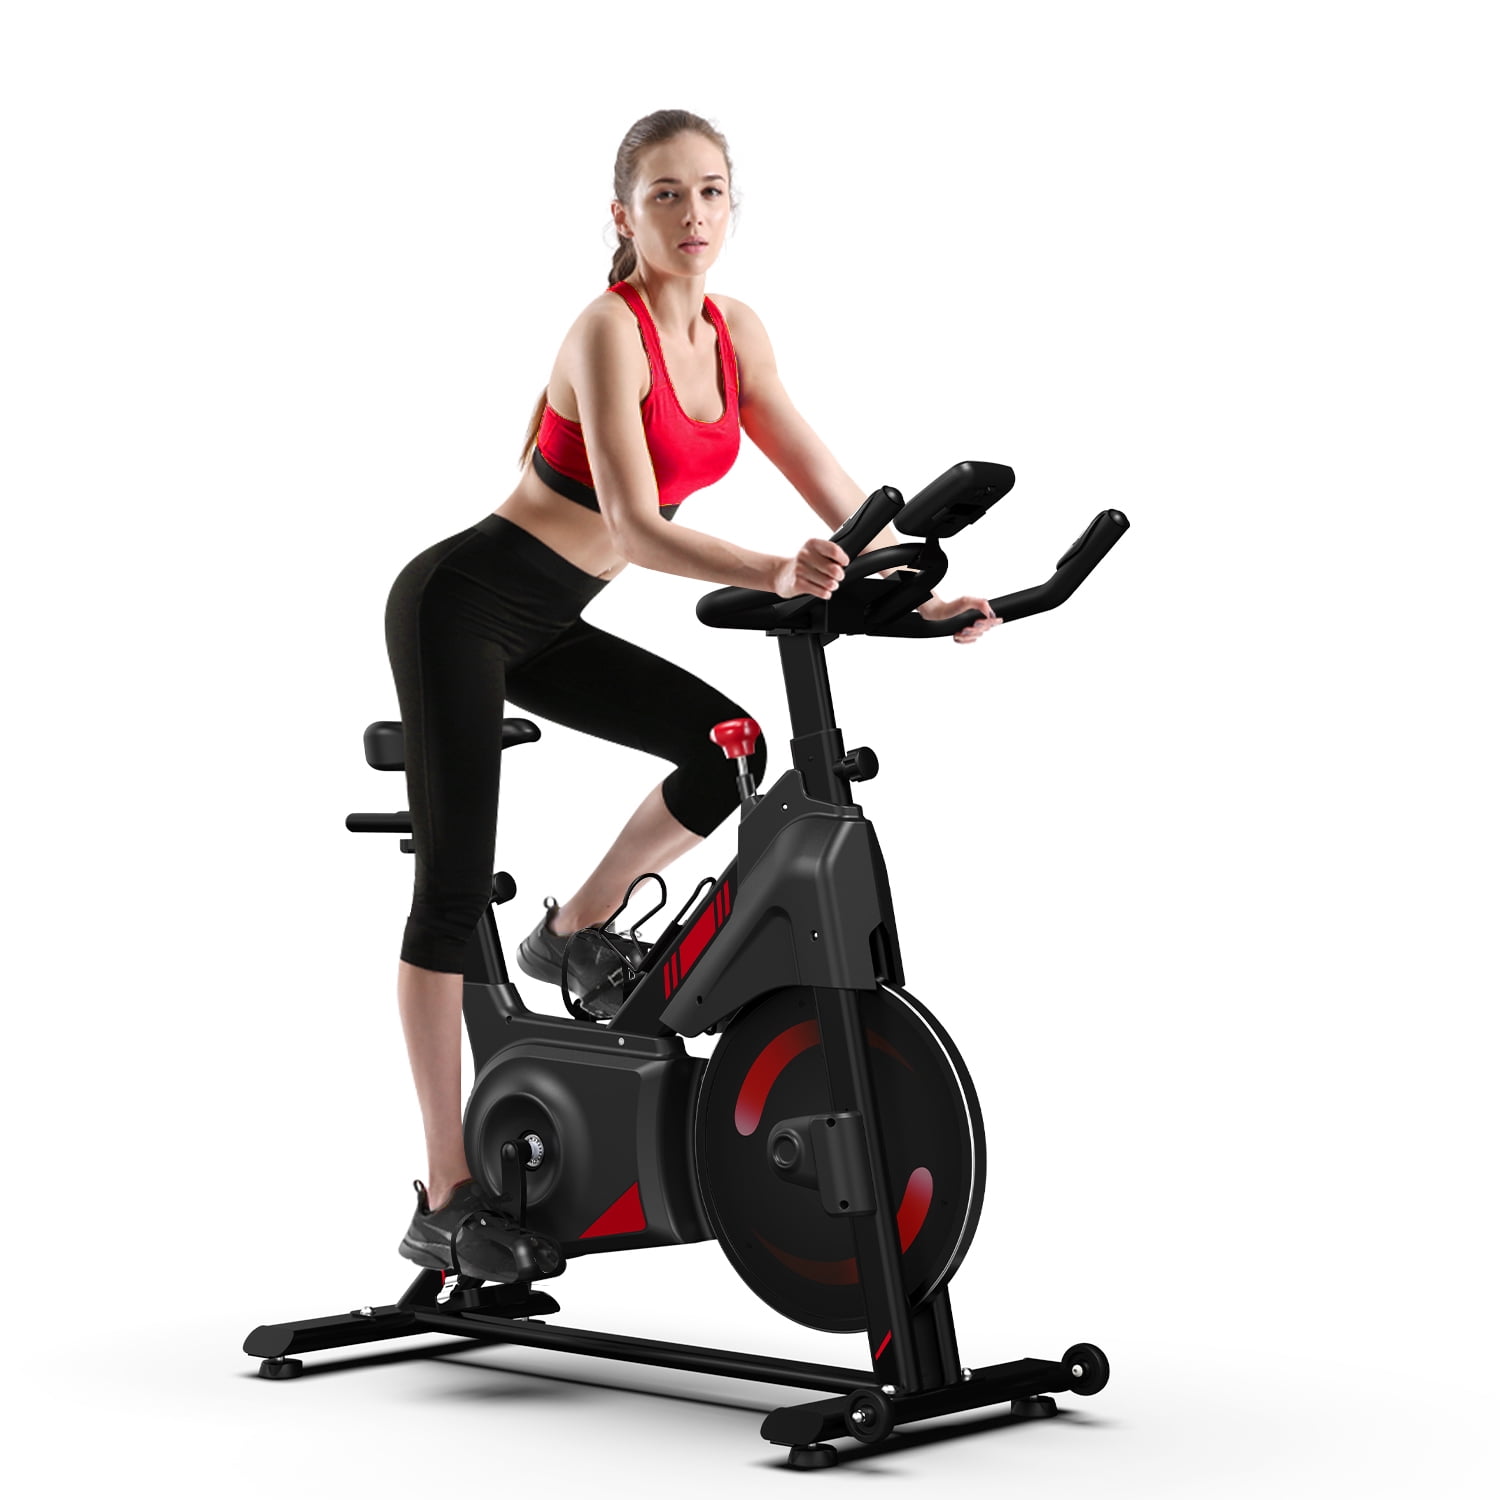 Cycle Tone by New Image Hands Free Exercise Bike 